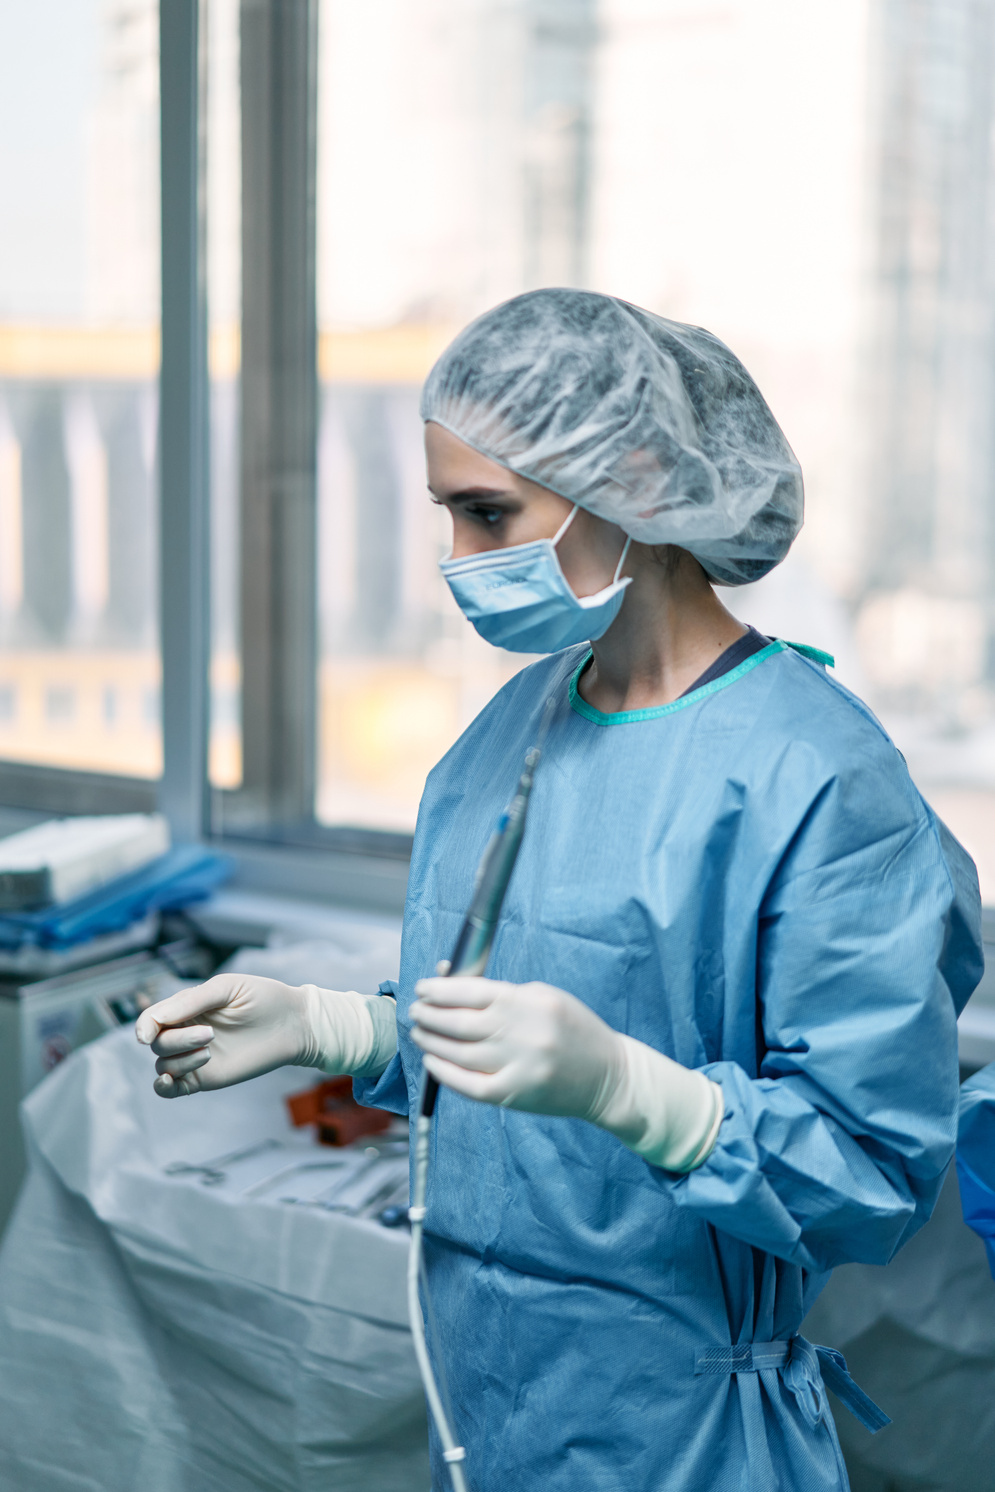 A Female Surgeon in an Operating Room